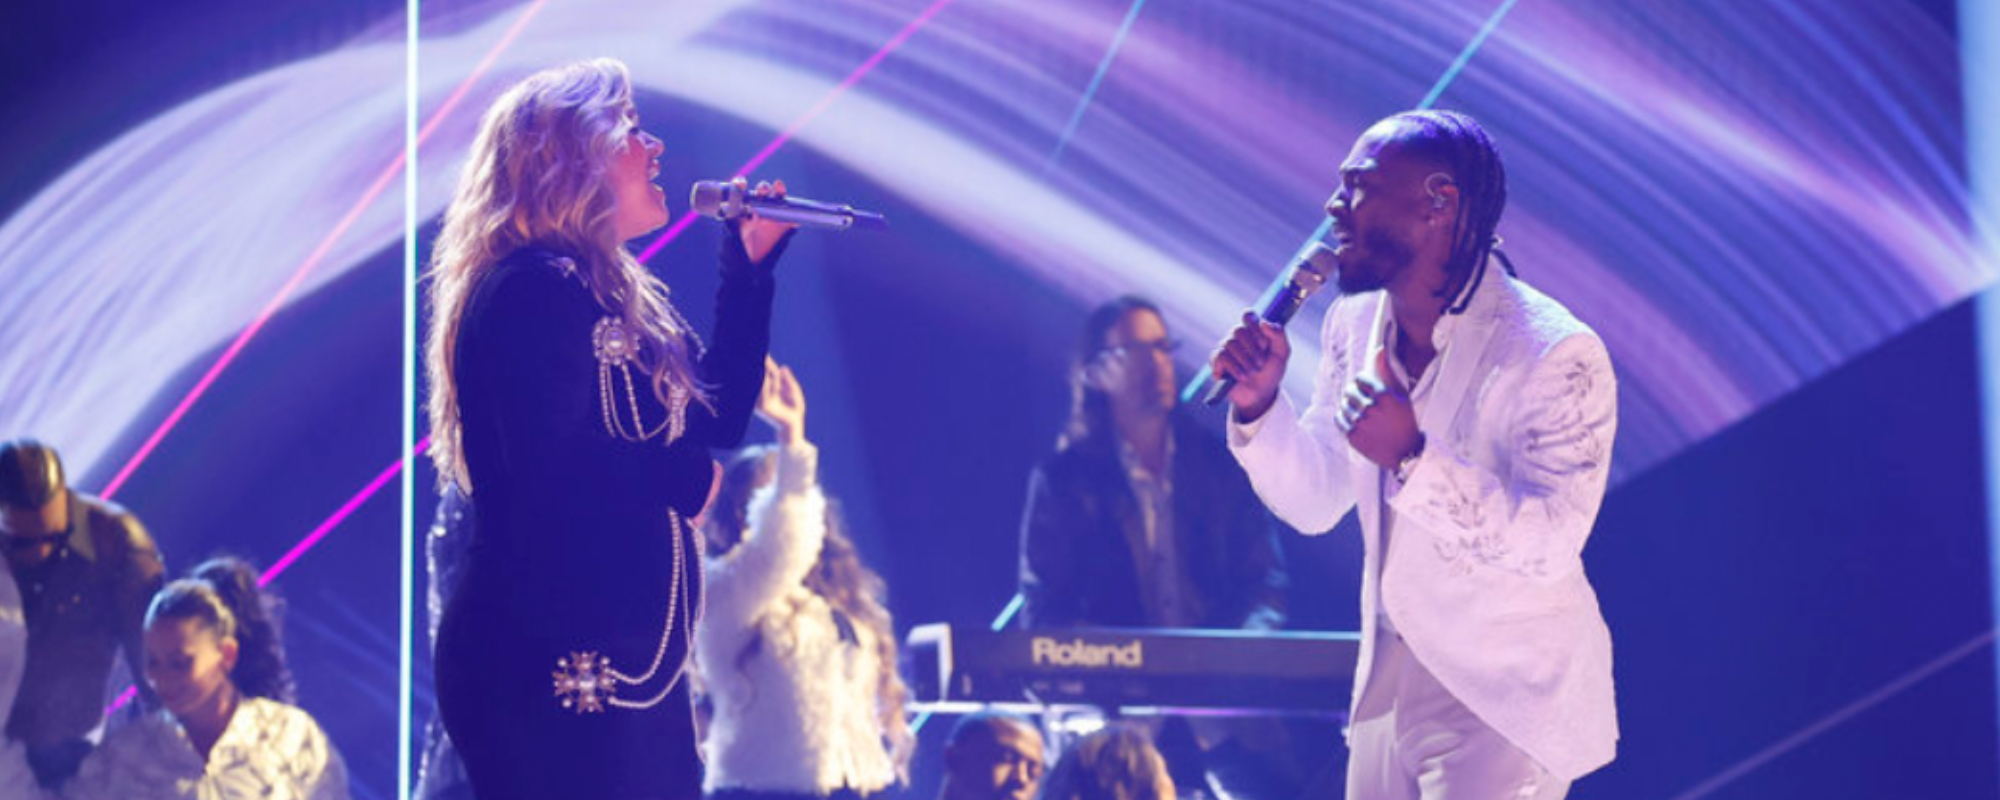 Kelly Clarkson Flexes Her Vocal Chops Alongside D. Smooth During ‘Voice’ Finale